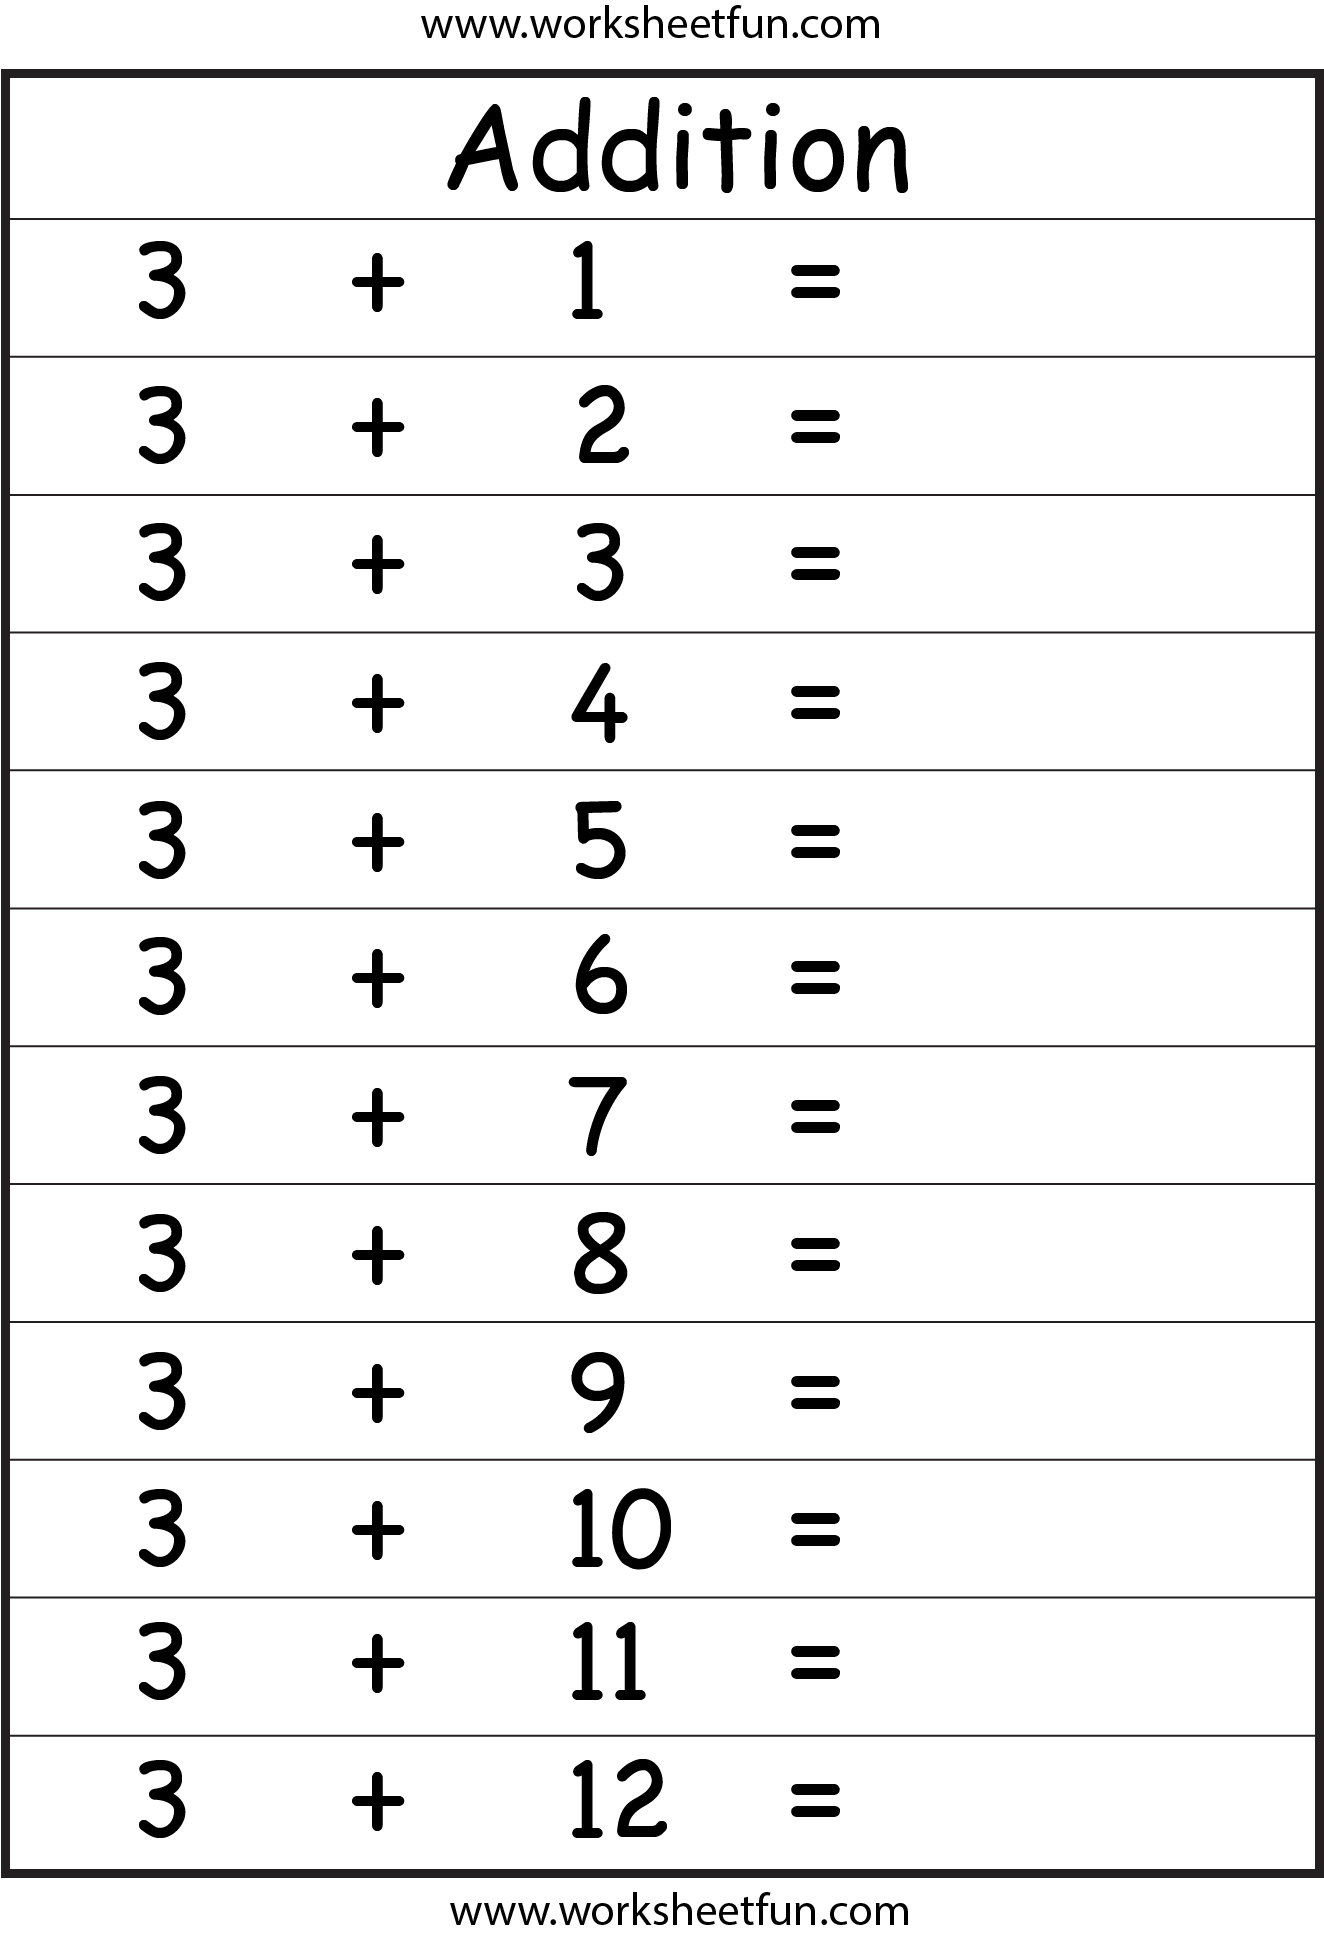 simple-math-worksheets-addition